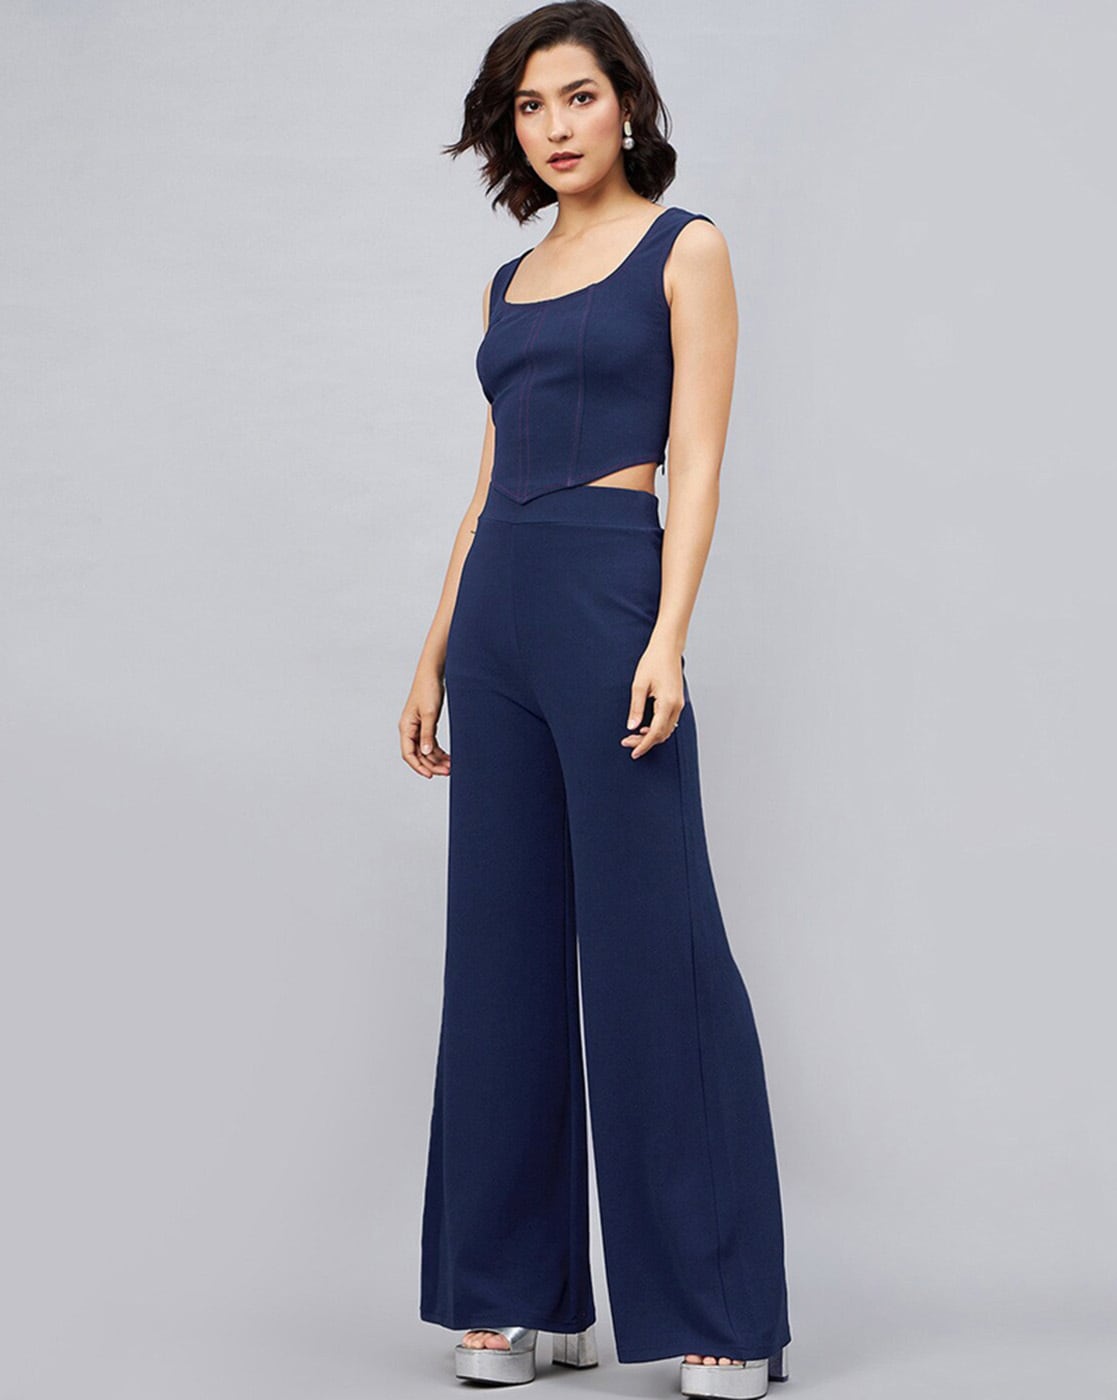 Sorrel - Women Nevyblue Pants with Bralette Crop Top Co-ord Set – Anuthi  Fashion